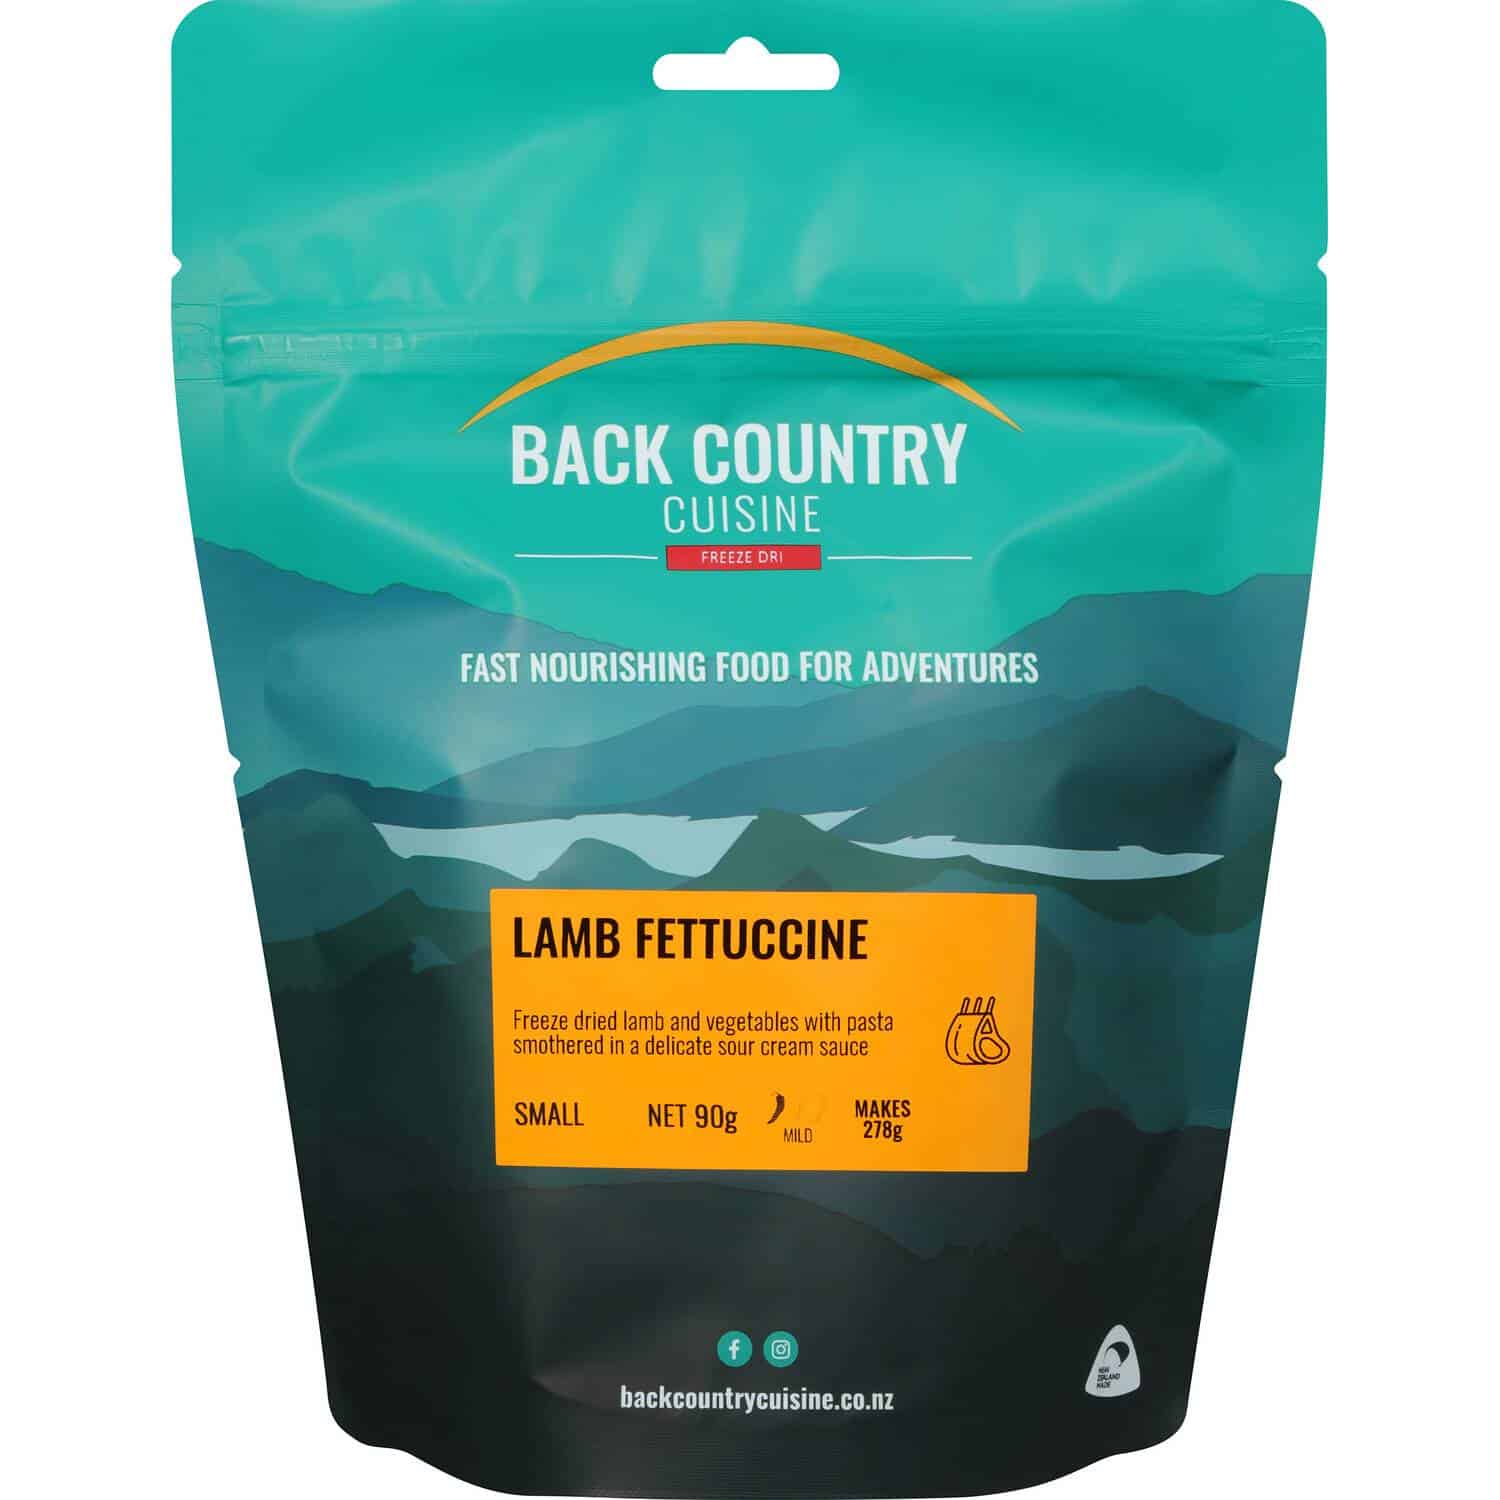 Back Country Cuisine Lamb Fettuccine Small - Tramping Food and Accessories sold by Venture Outdoors NZ